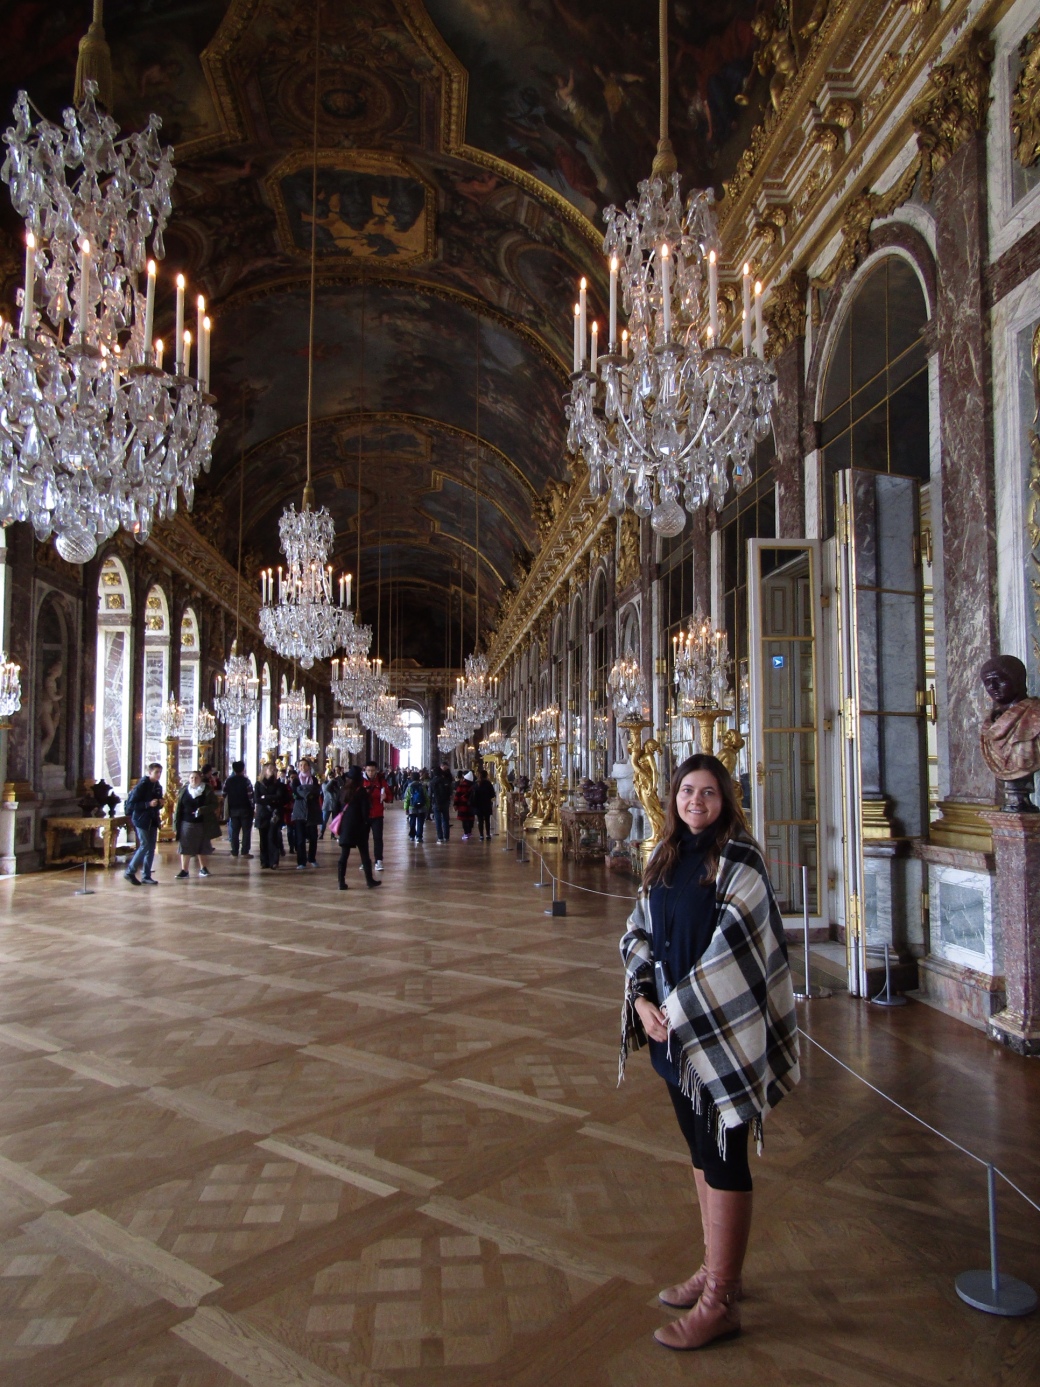 The 240-feet long Hall of Mirrors was a passageway for visitors waiting for an audience with the king. The ostentatiousness of the hall was intentional as visiting foreign leaders would have to make their way through this show of French power.